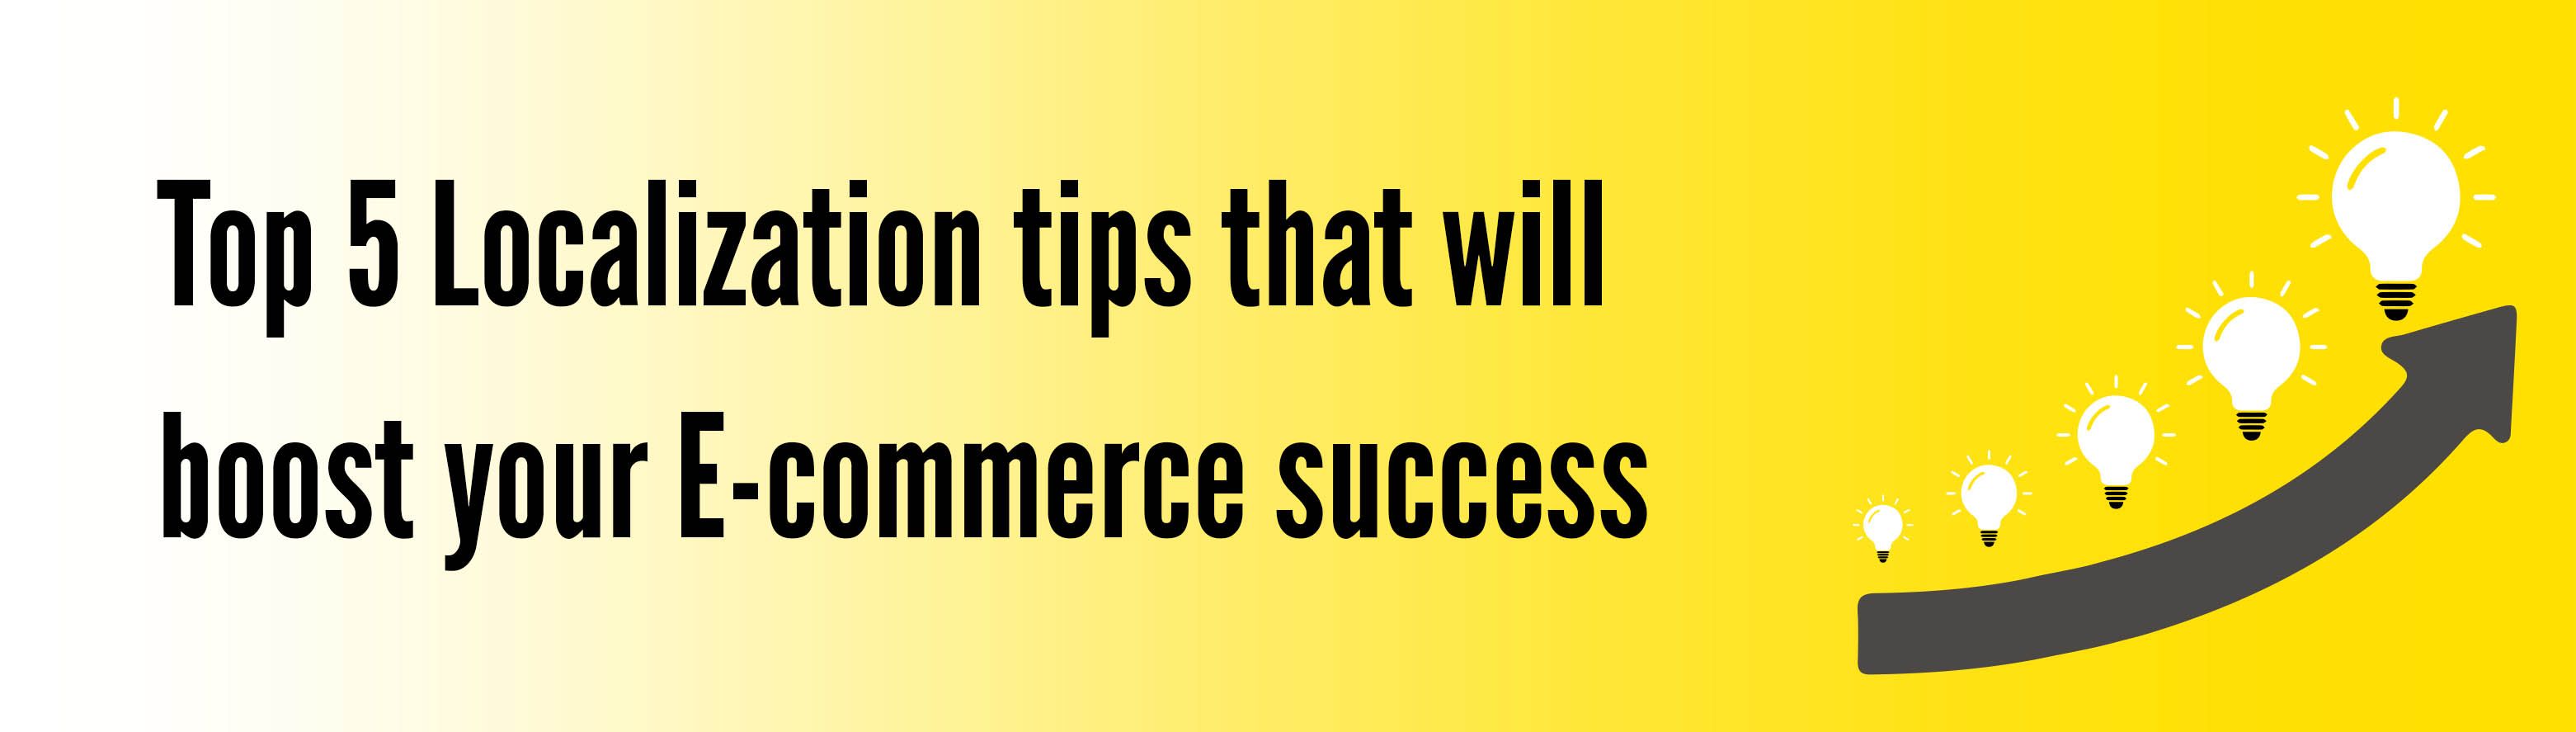 Top 5 Localization Tips that will Boost Your E-commerce Success